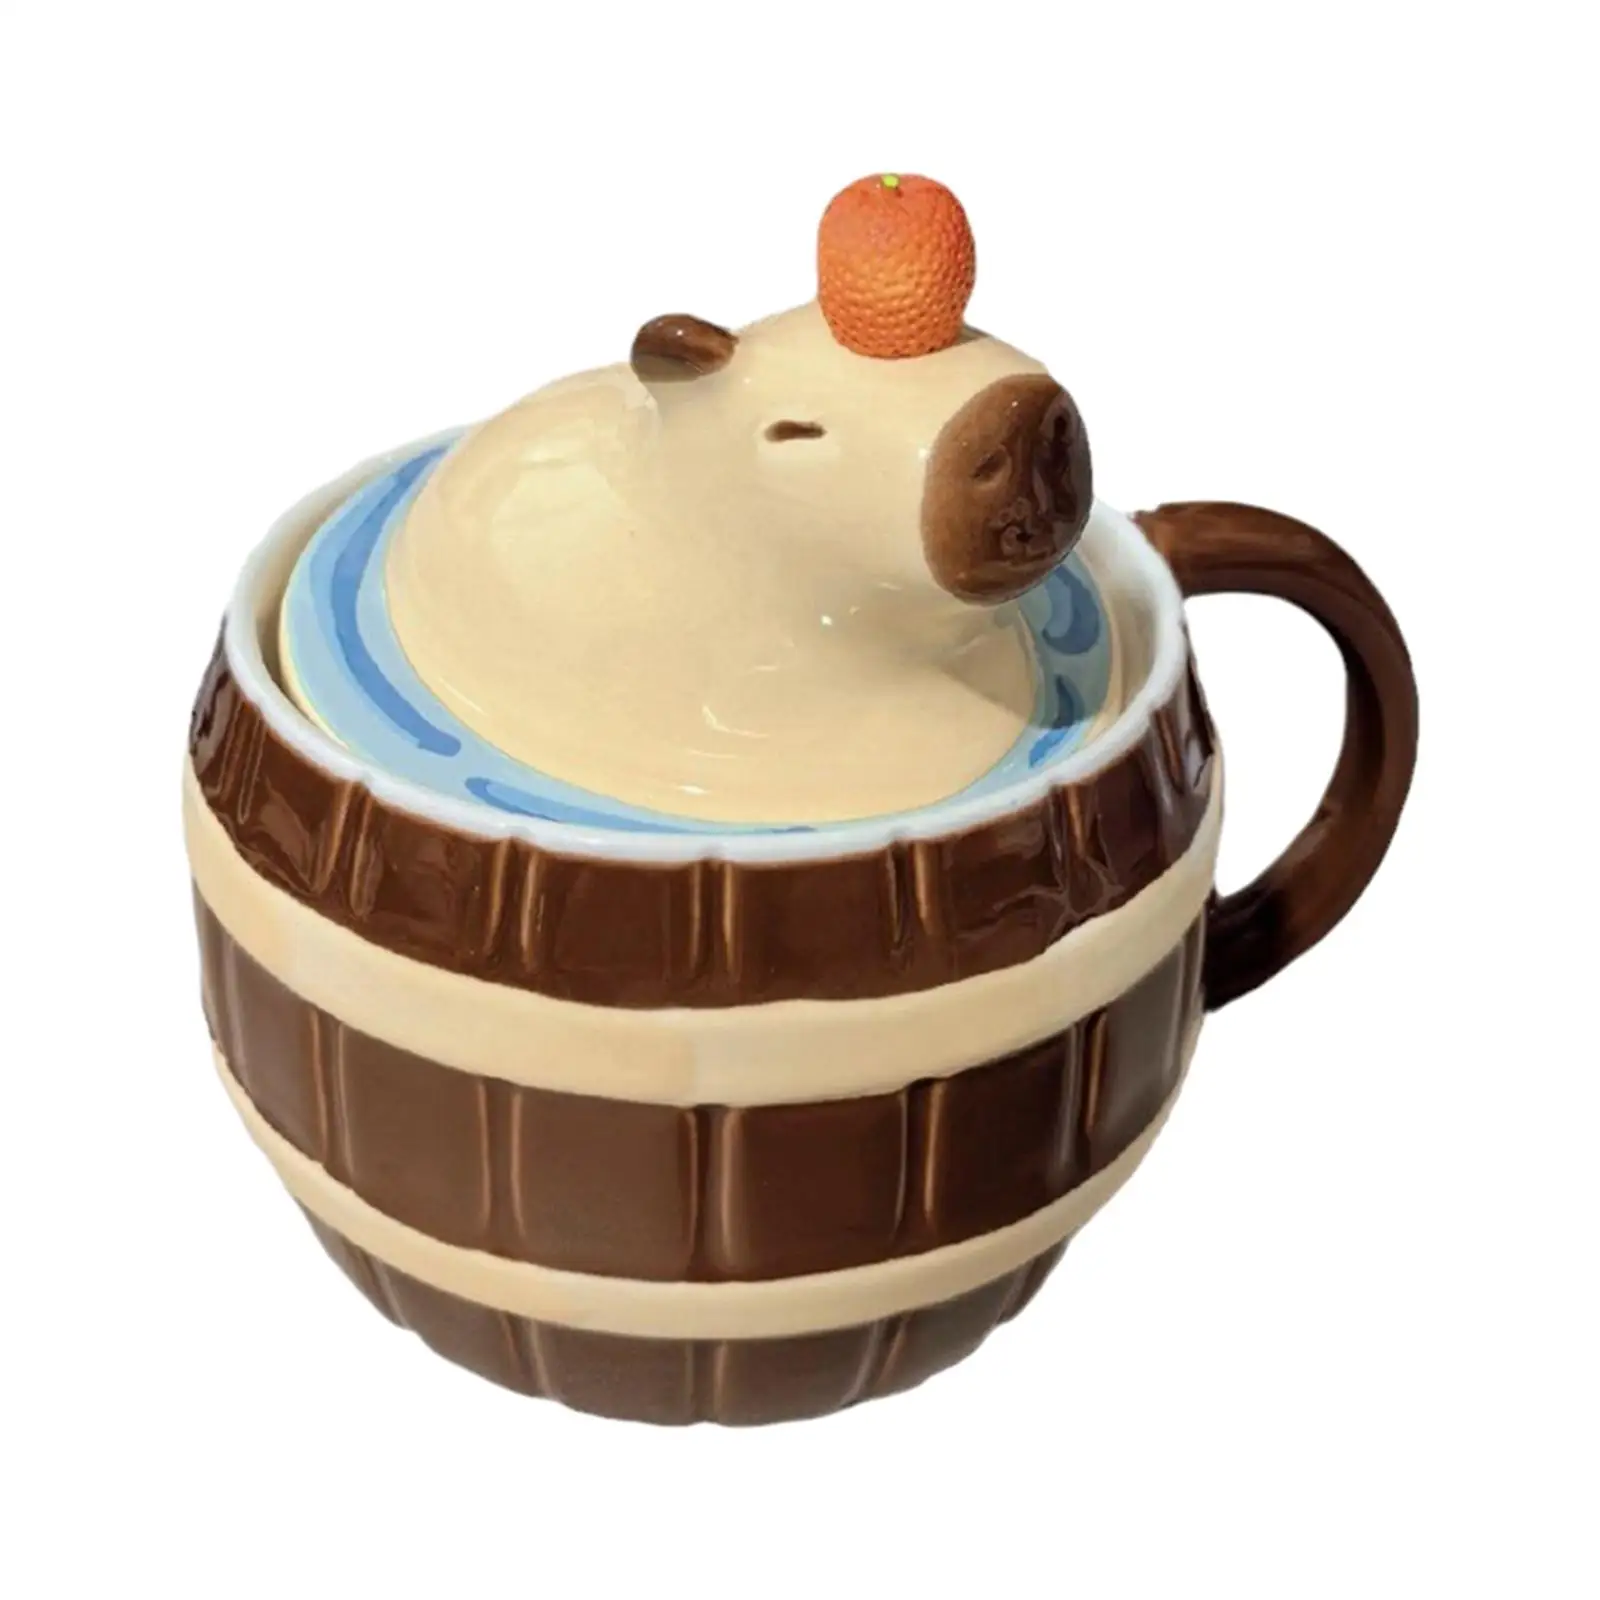 Capybara Coffee Mug Capybara Drinking Cup Pottery Mug Ice Porcelain Cup Animal Coffee Cup Wide Mouth for Milk Espresso Latte